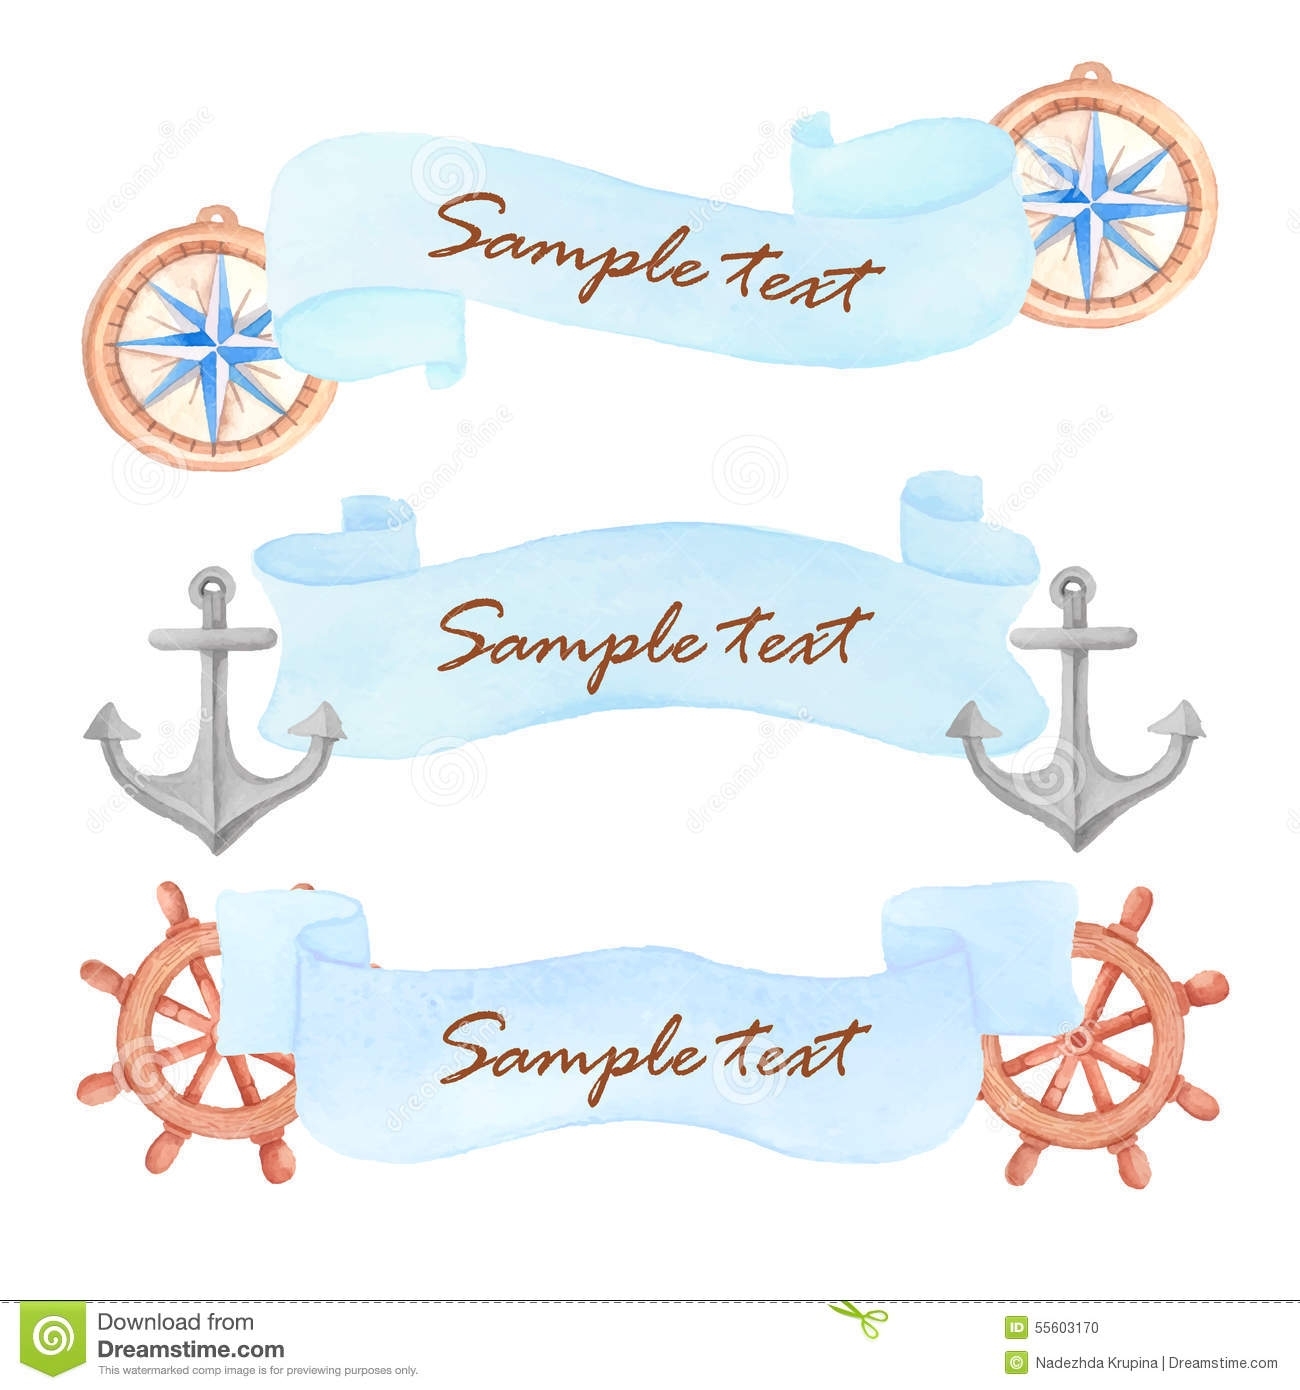 Watercolor Nautical Banner Stock Vector. Illustration Of Graphic - 55603170 With Nautical Banner Template